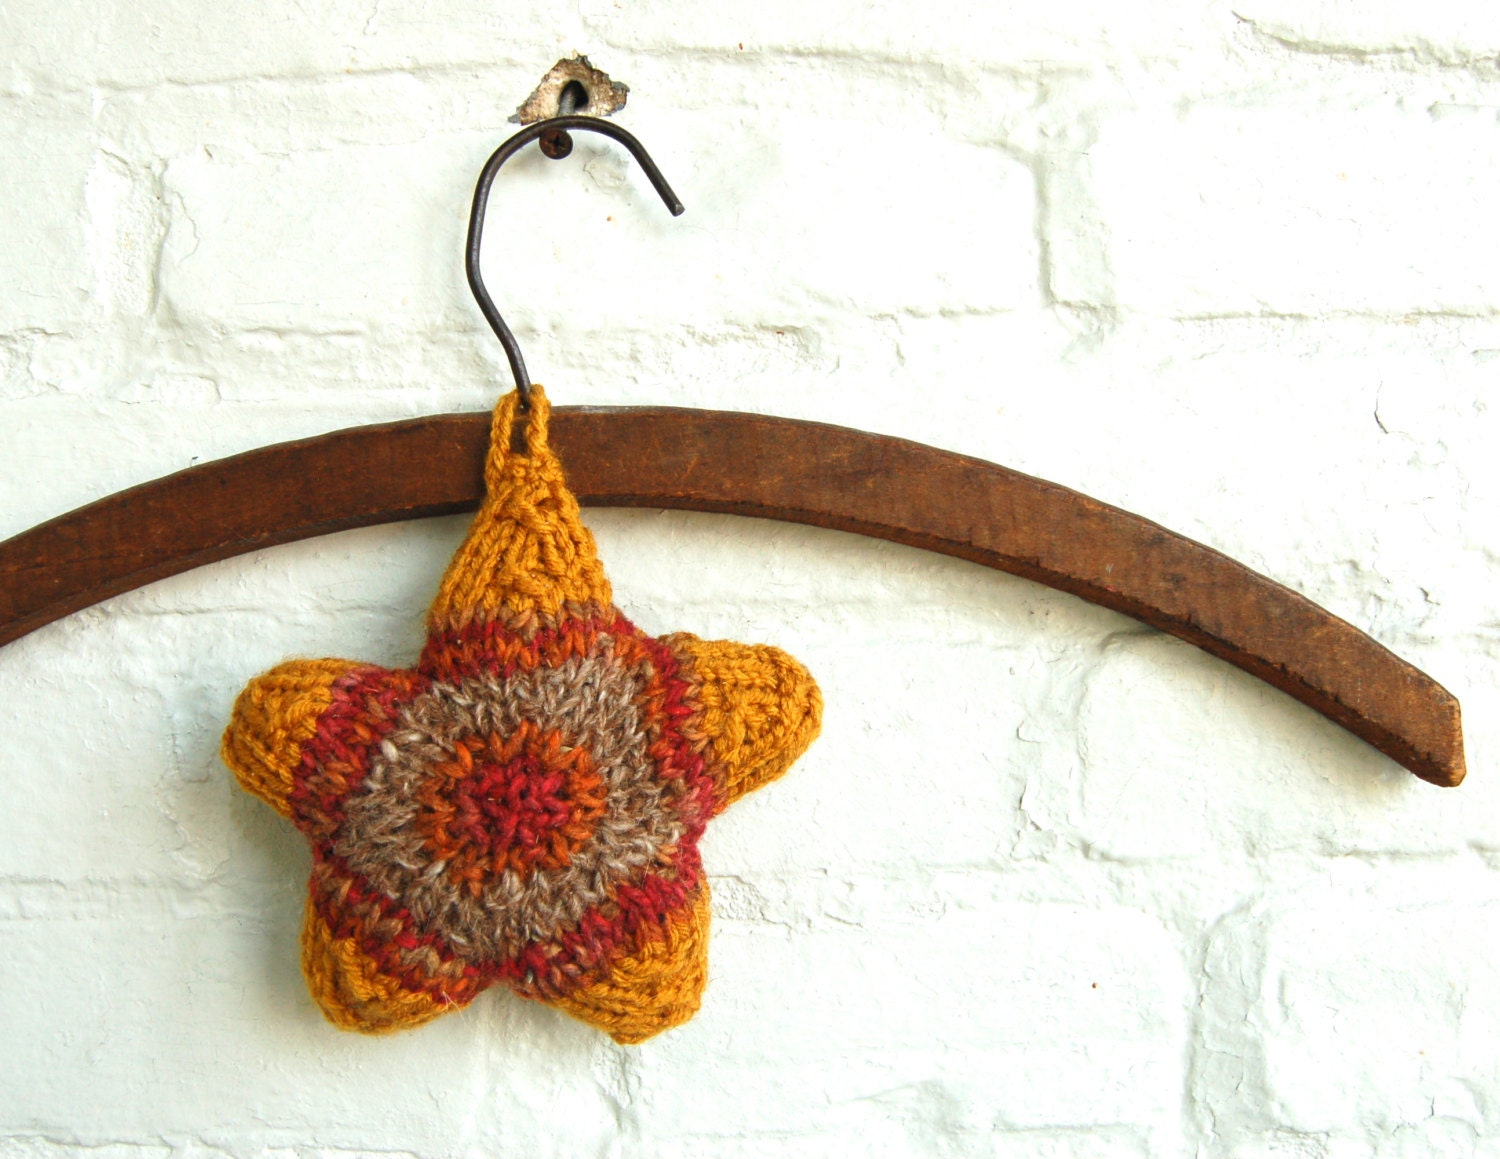 Hand Knit Star Sachet Lavender and Clove Fragrance Closet Ornament Air Refresher Natural